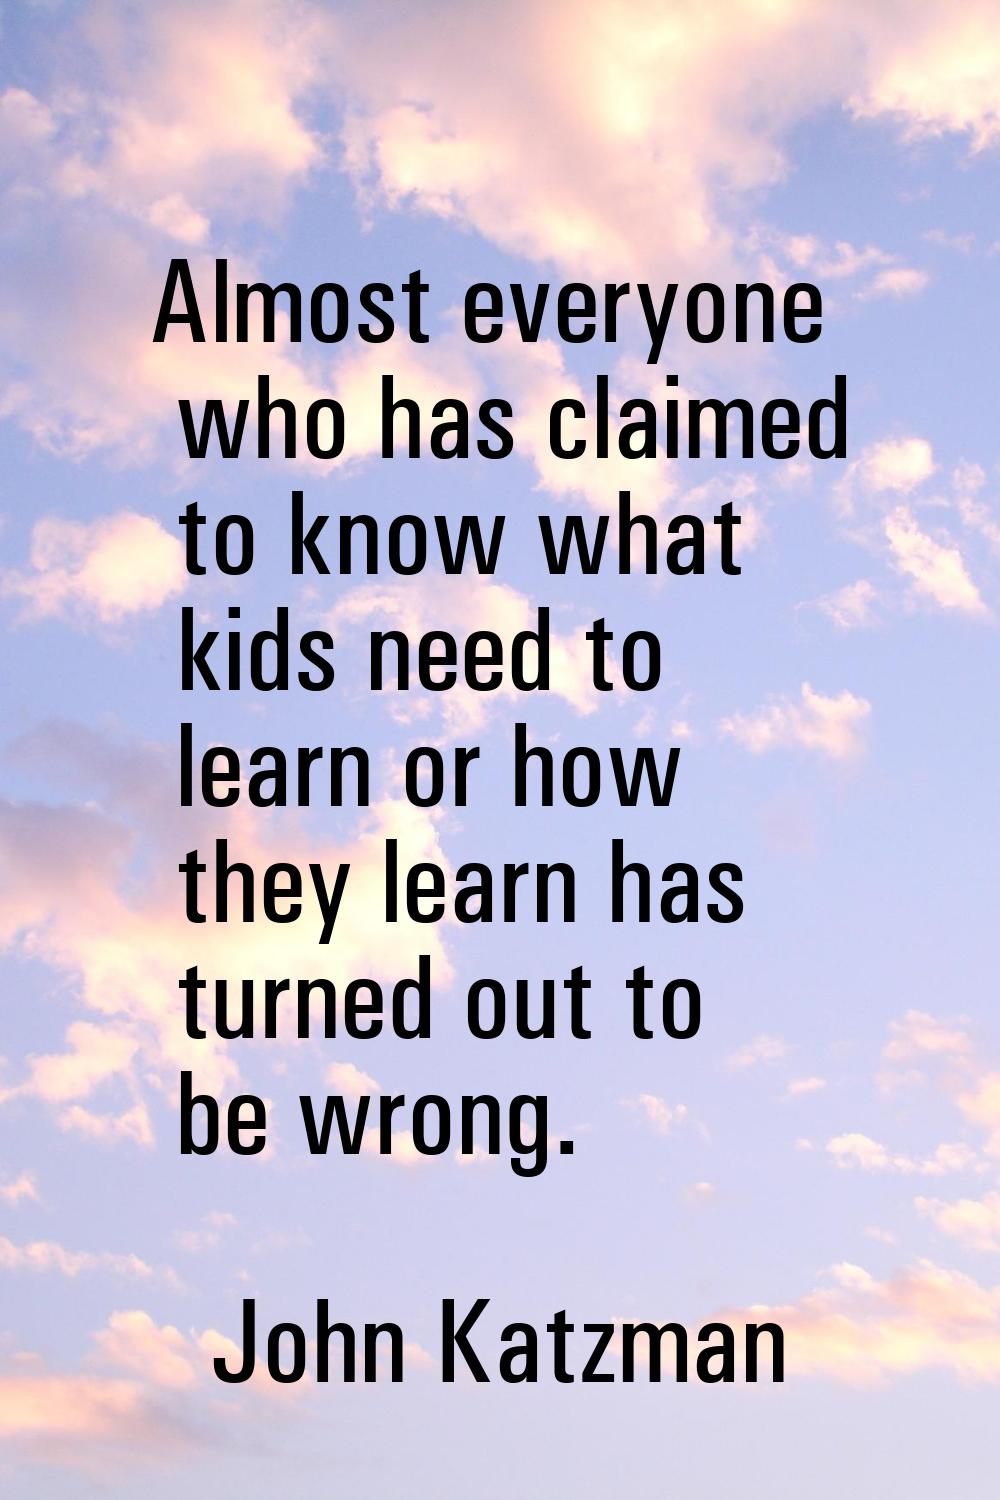 Almost everyone who has claimed to know what kids need to learn or how they learn has turned out to